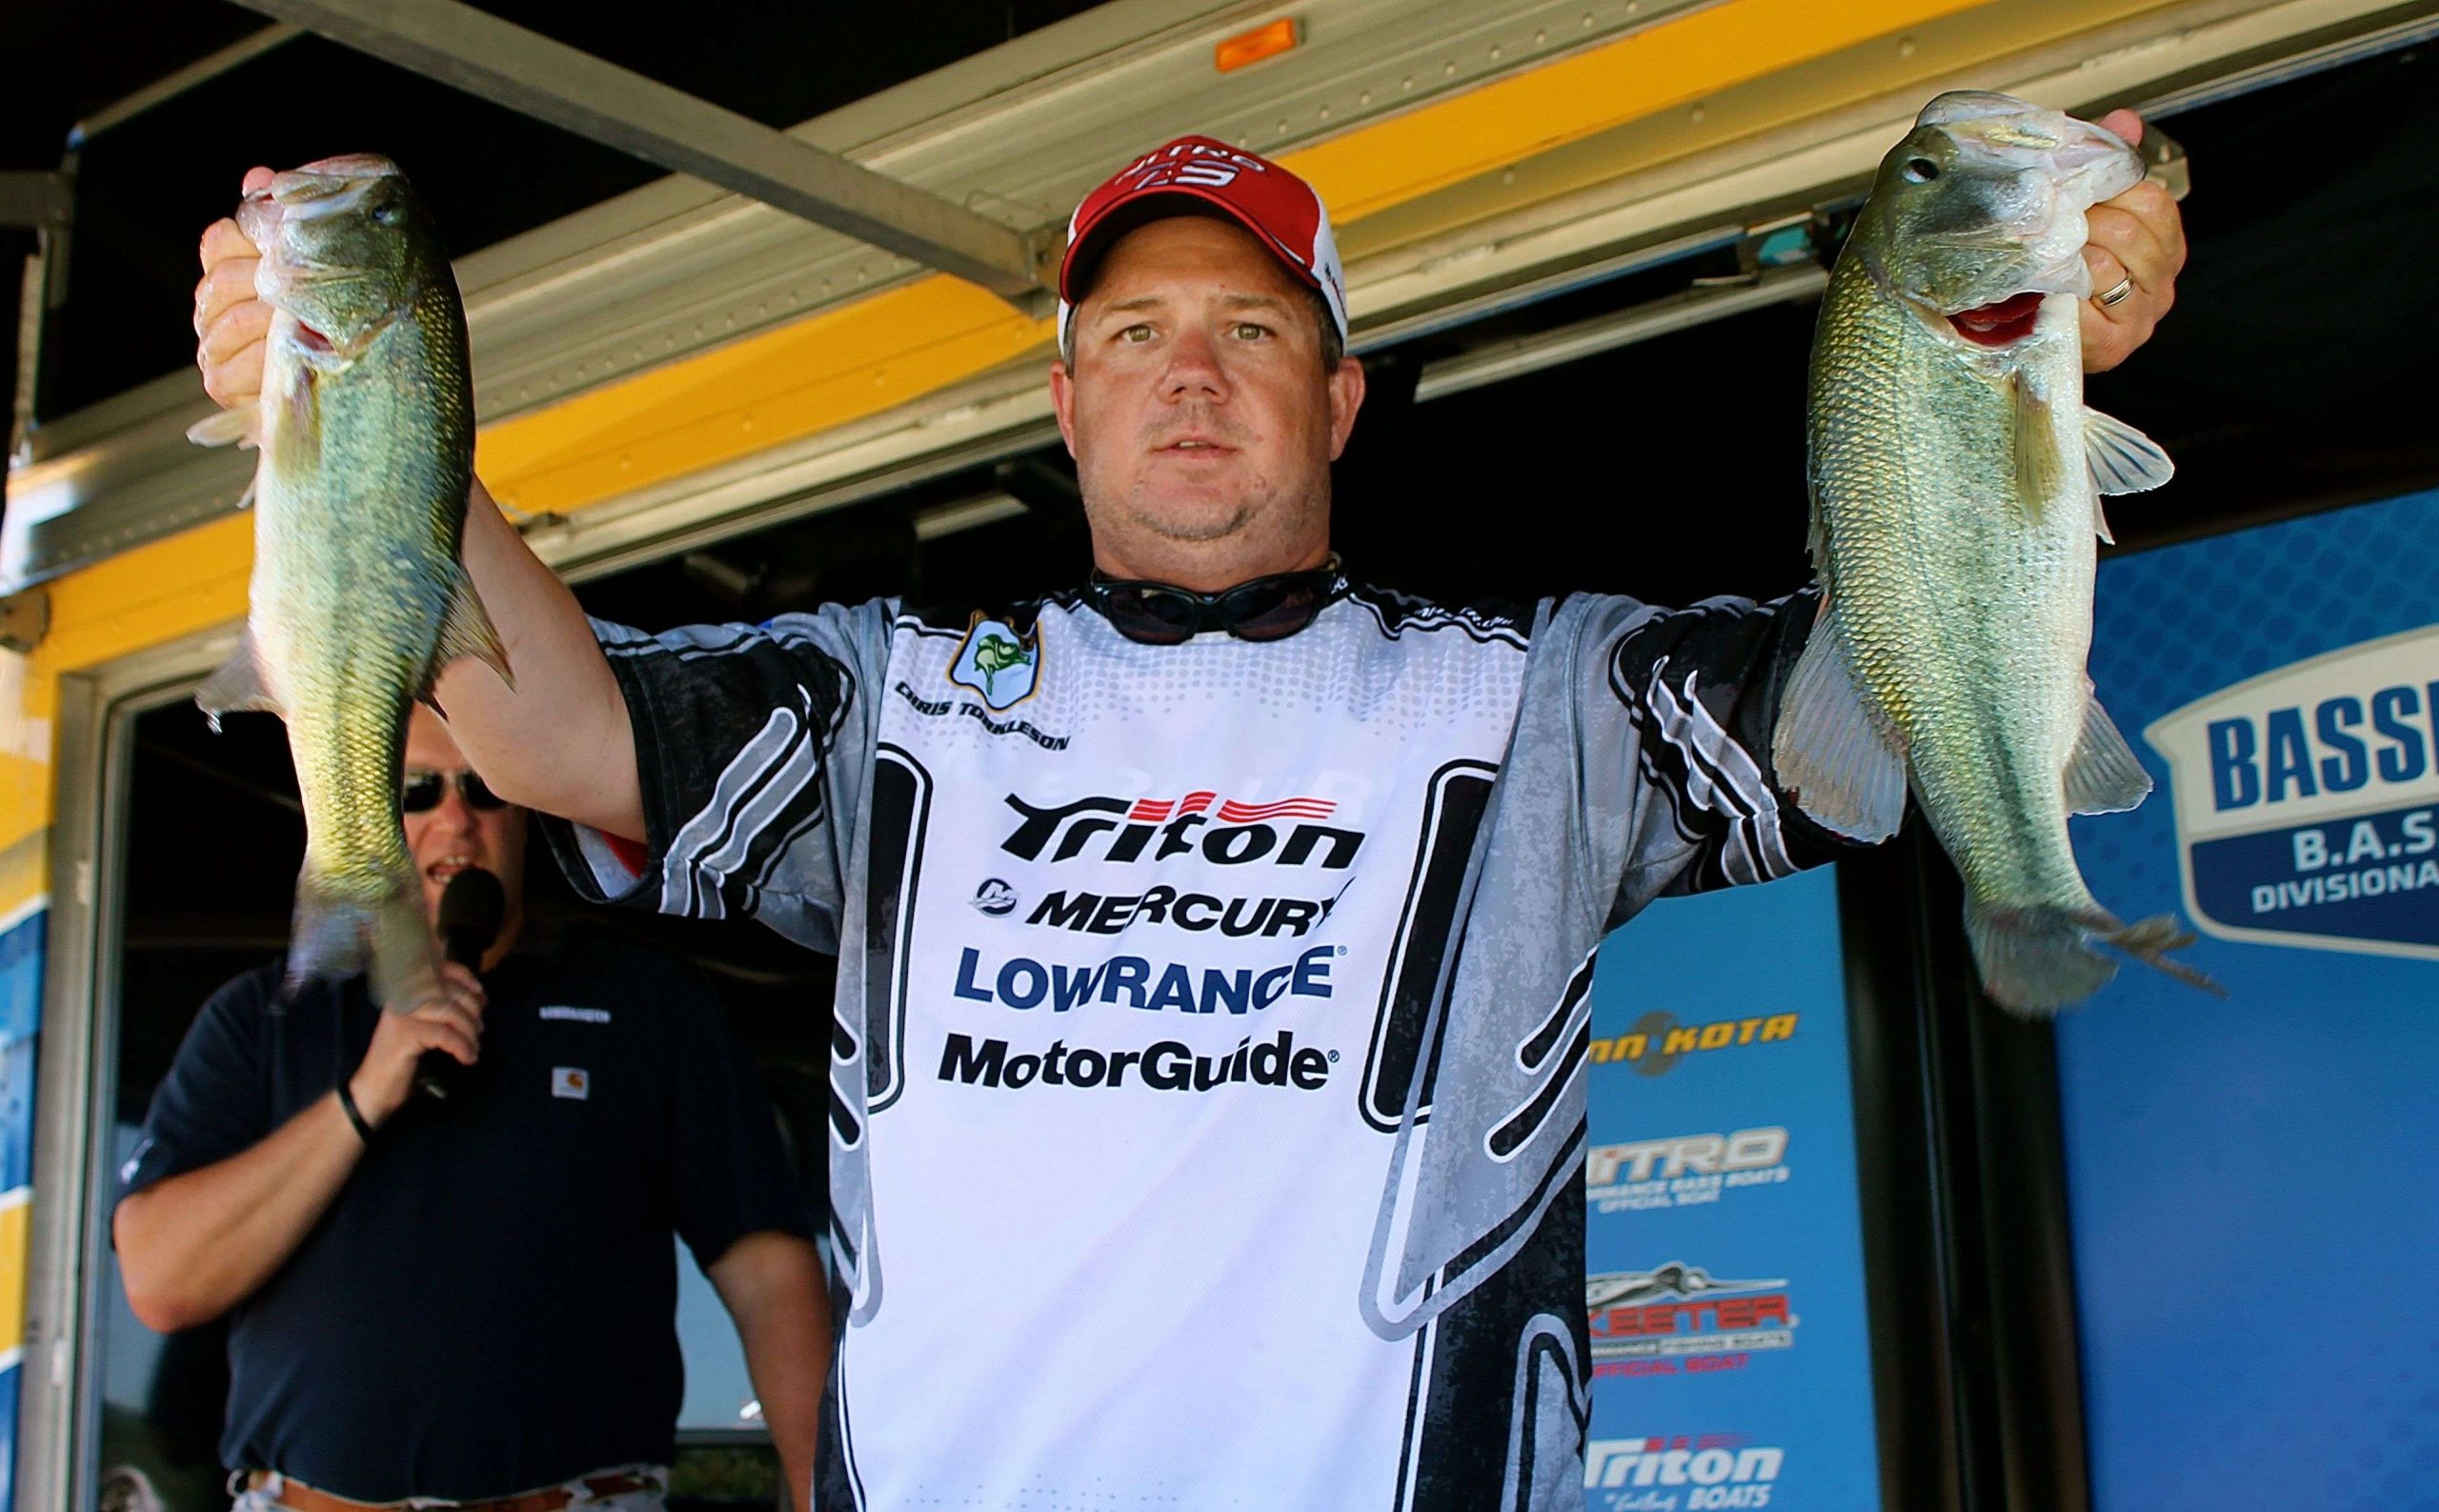 Chris Torkelson of Sand Springs, Okla., is in fifth place, with 12-9. A native Kansan, he fishes for the Kansas B.A.S.S. Nation team.